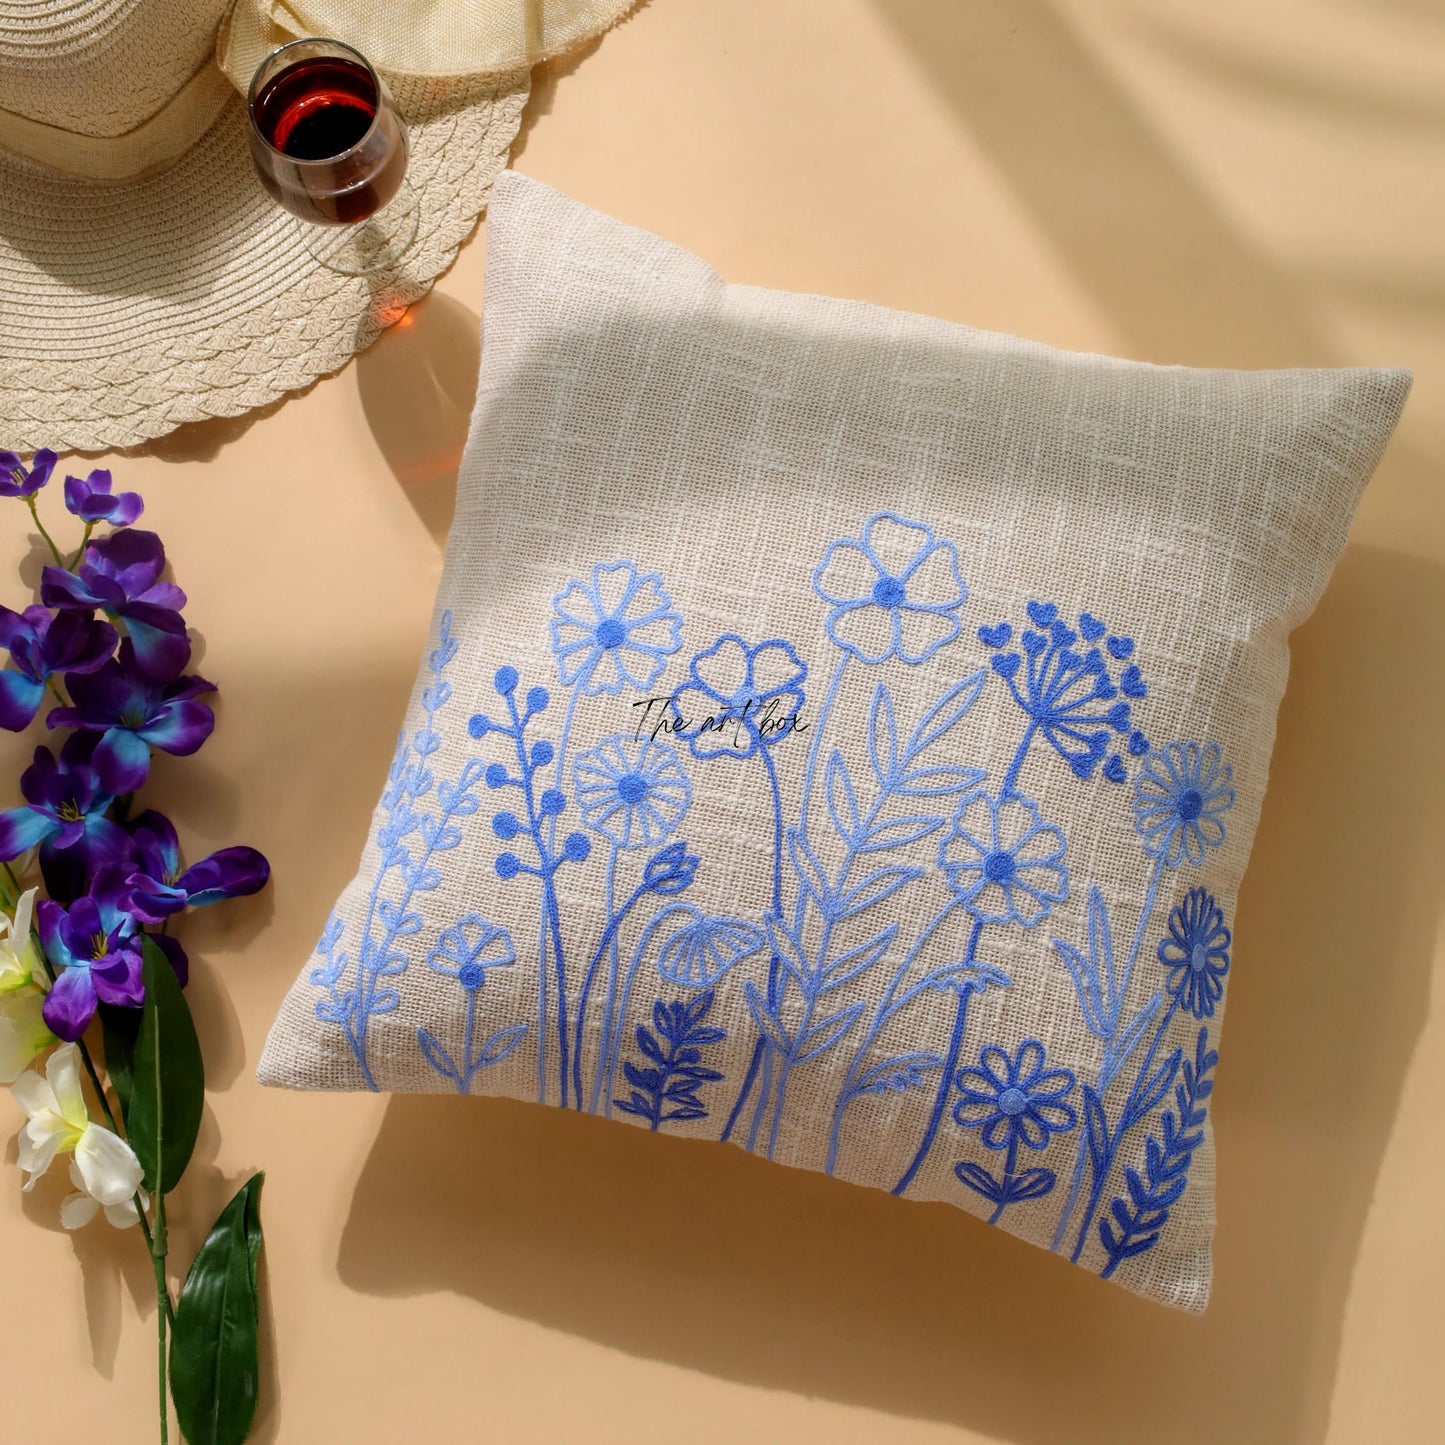 Embroidered Flower Cushion - Blooming Beauty for Your Decor